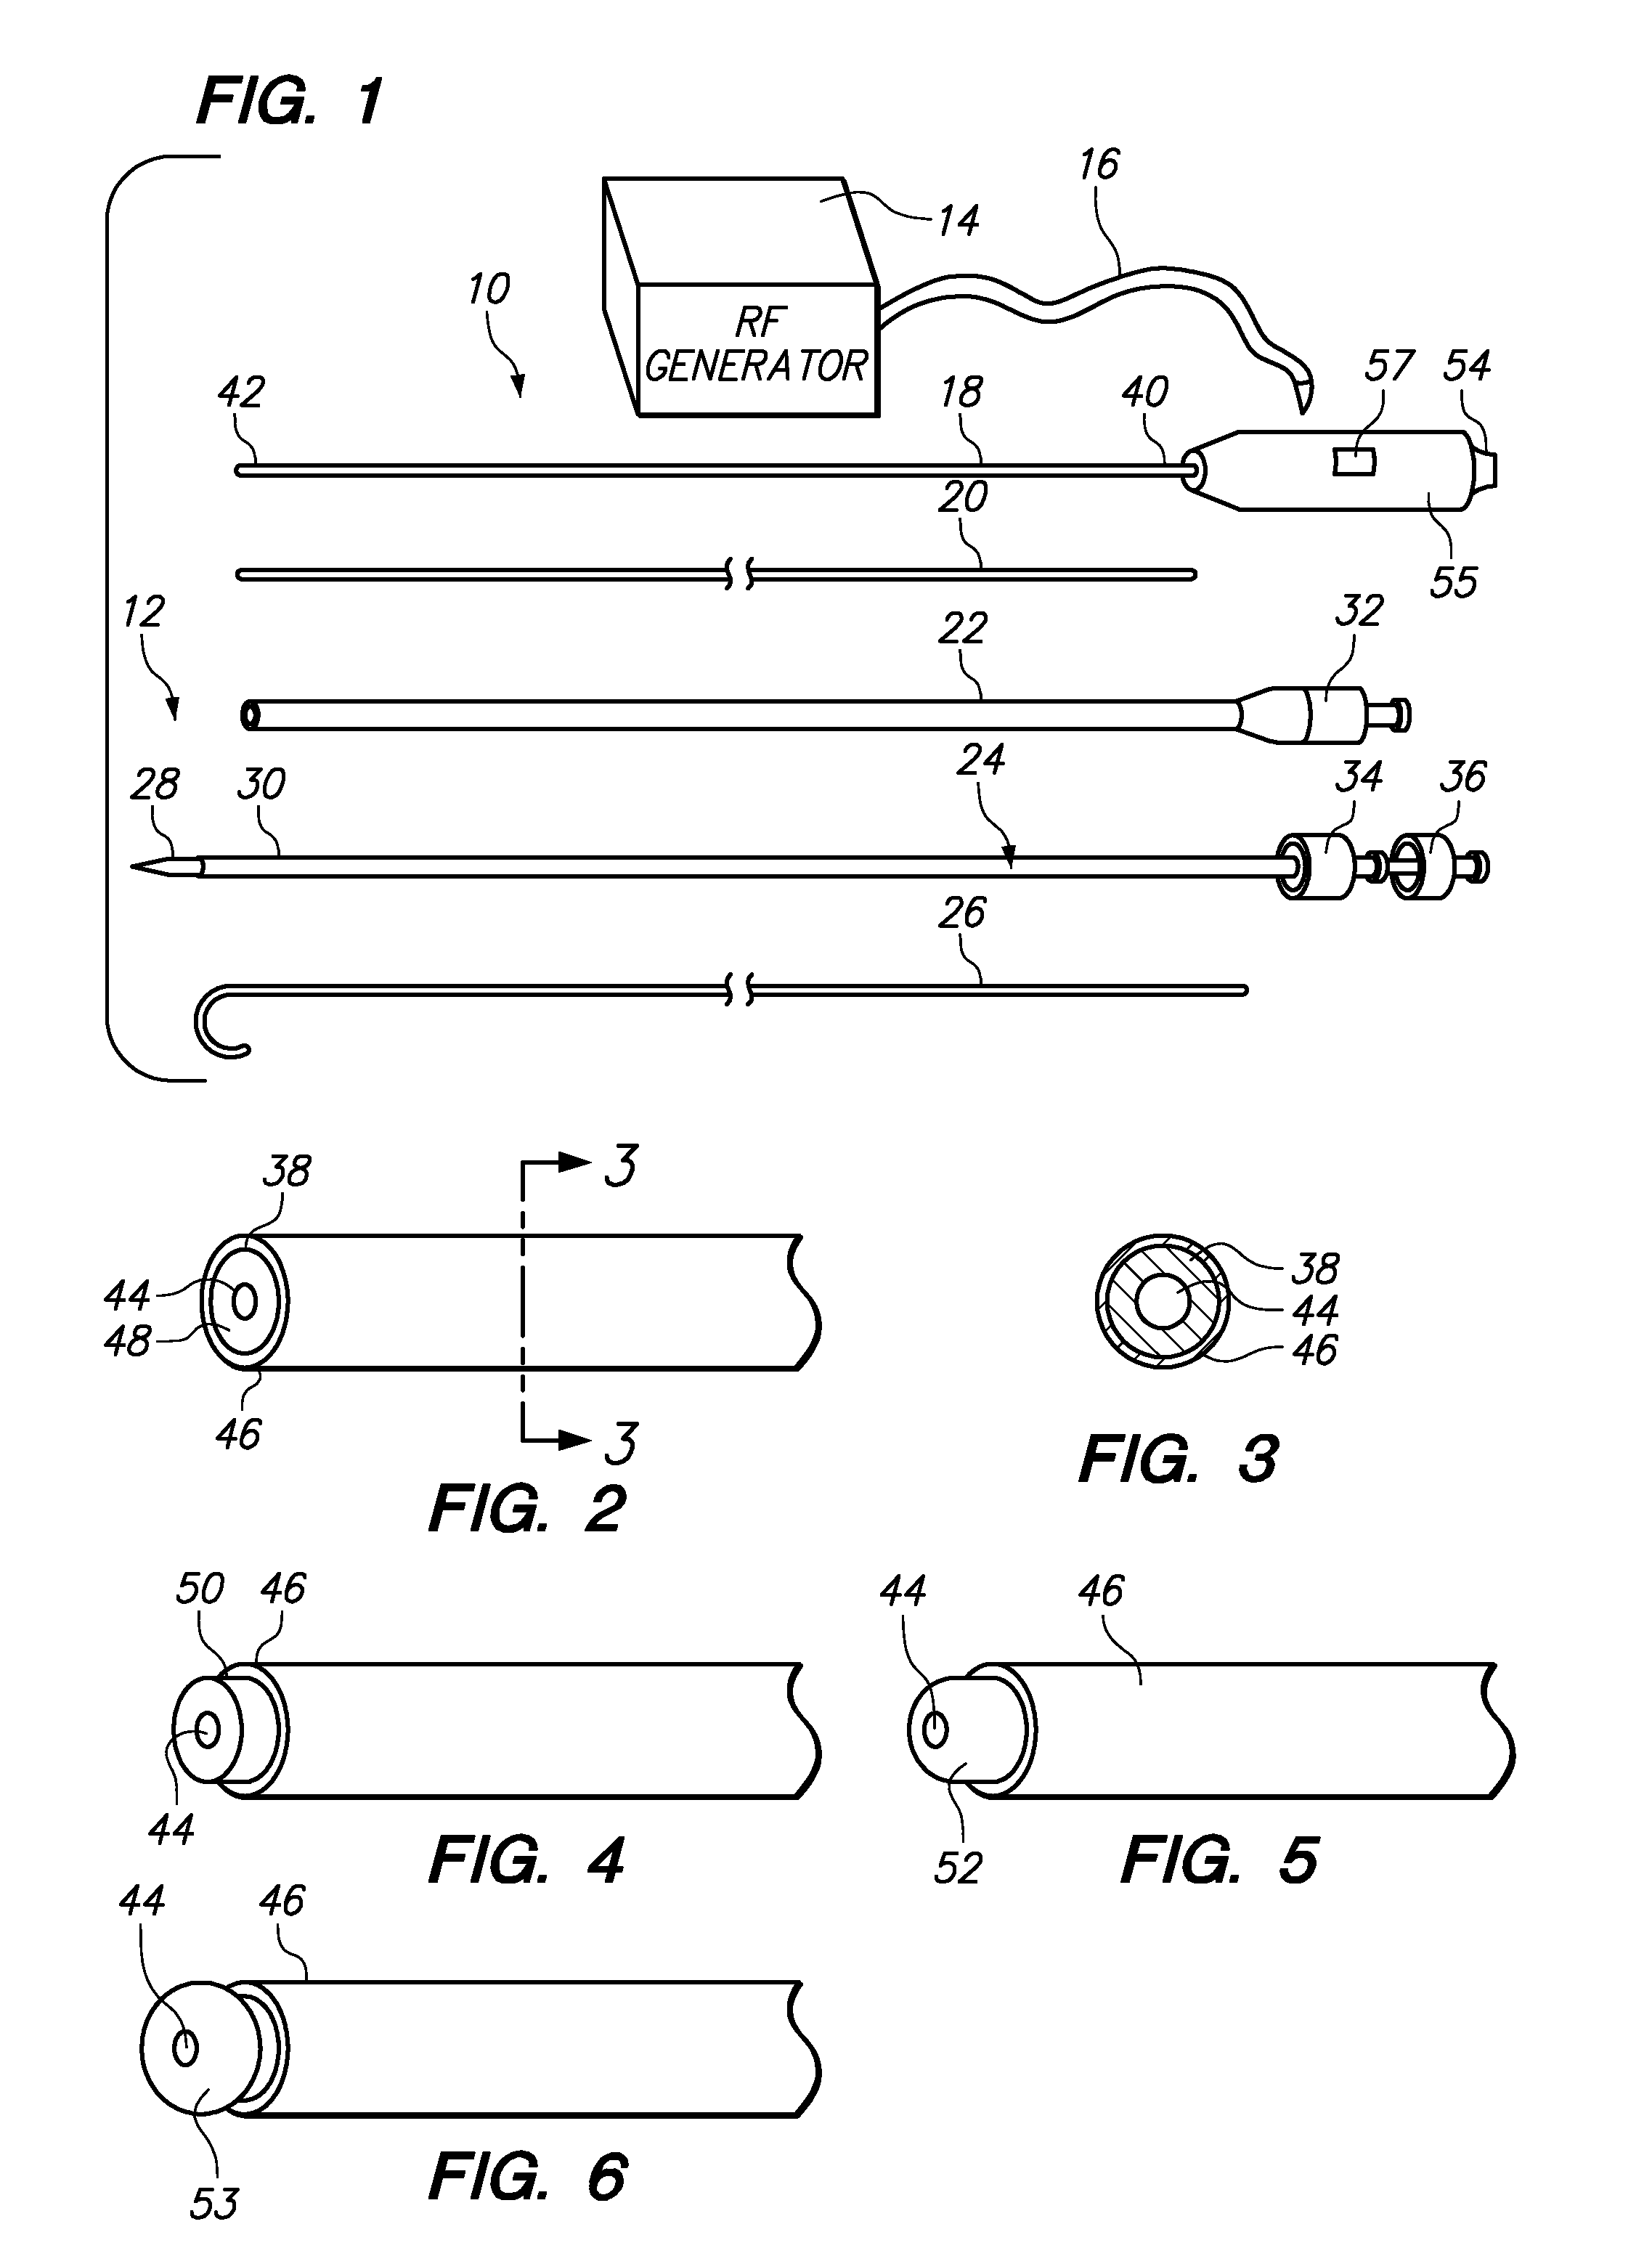 Methods and apparatus for percutaneous patient access and subcutaneous tissue tunneling